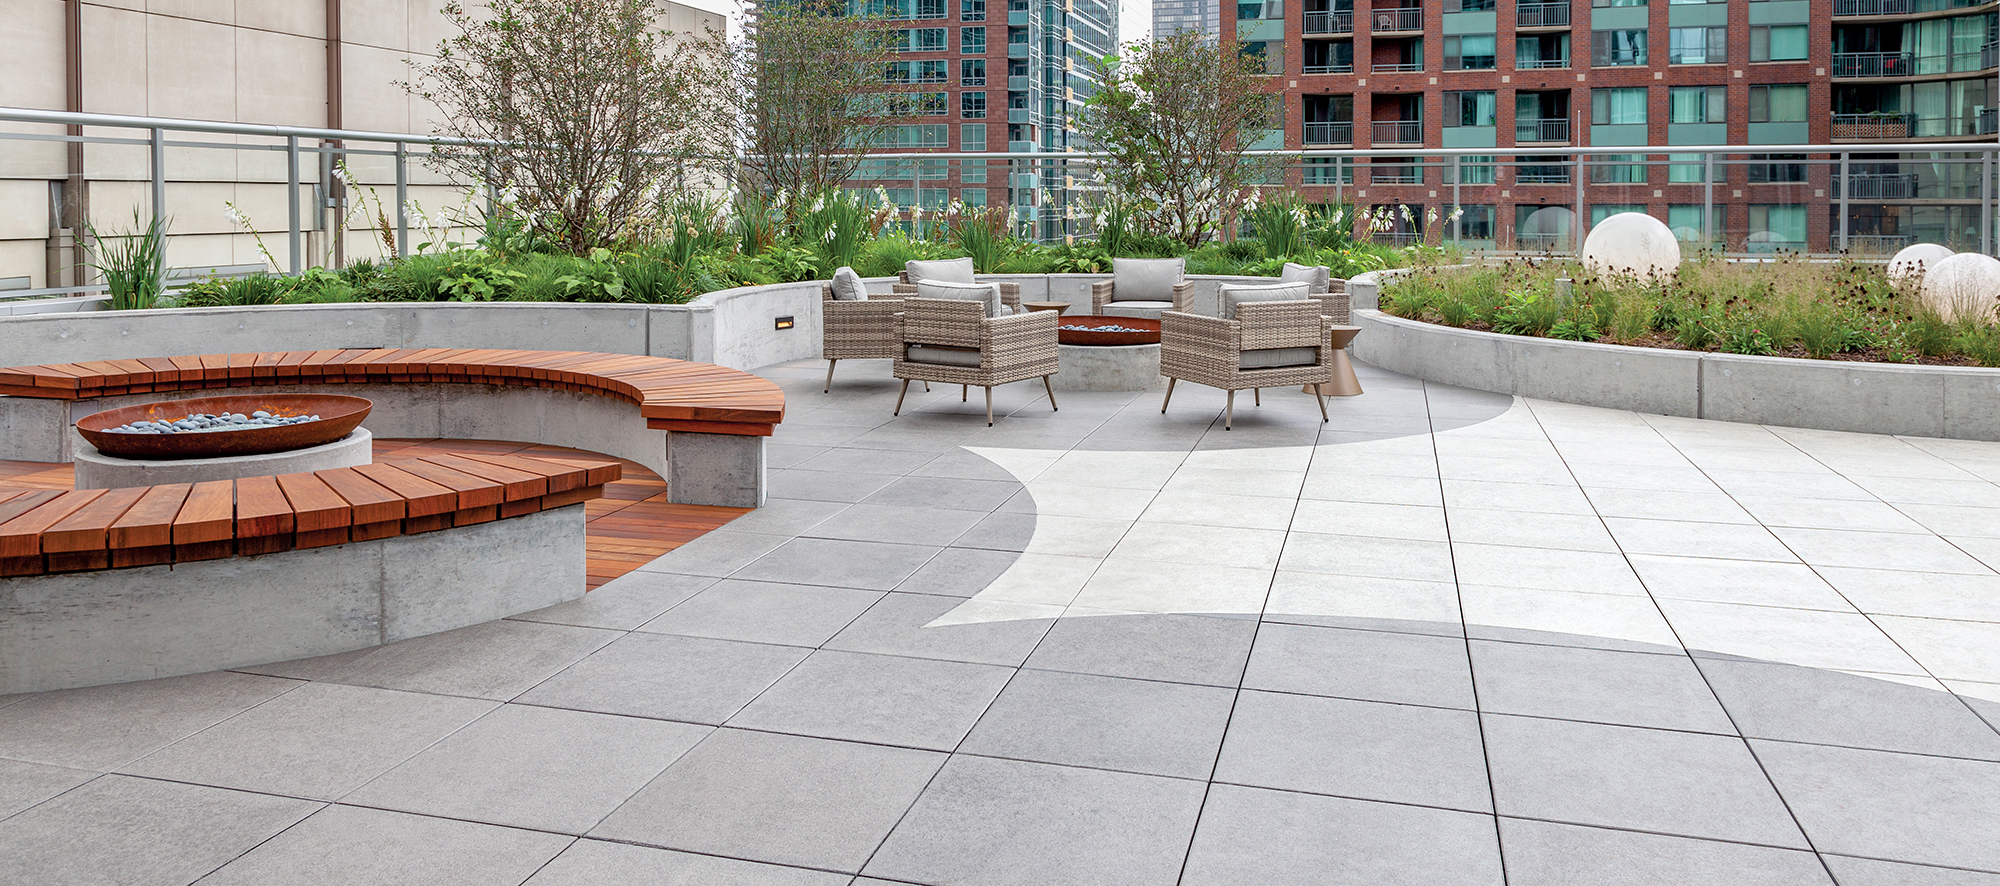 A circular themed roof deck created with Unilock Arcana slabs in white and grey offers condo residents firepits, seating, and gardens.